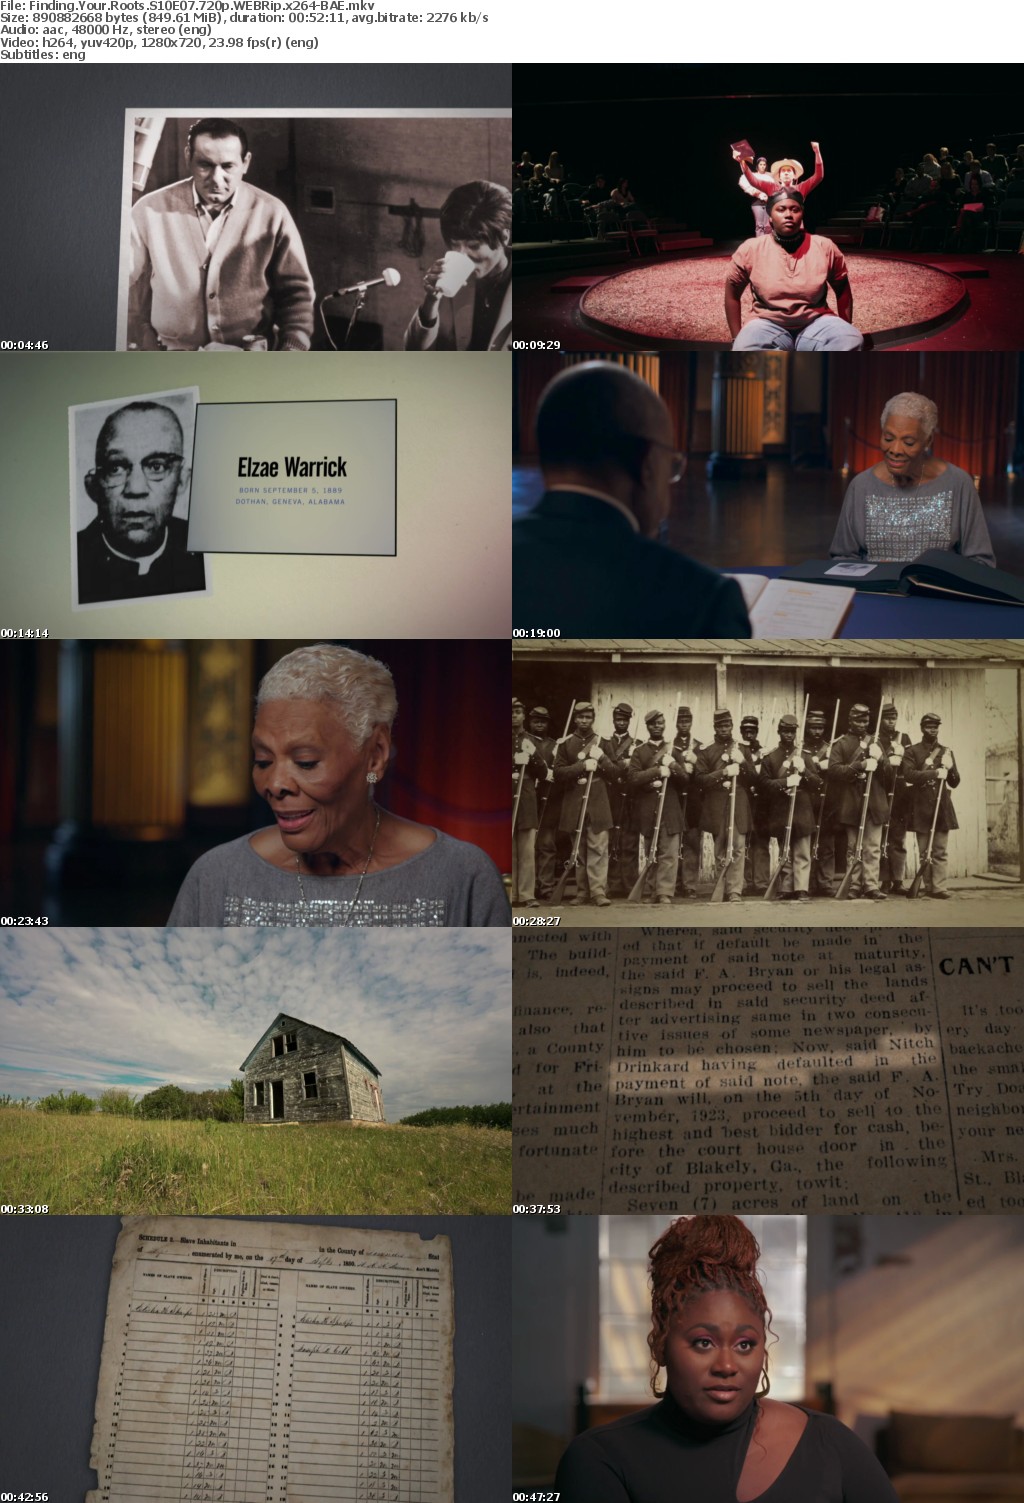 Finding Your Roots S10E07 720p WEBRip x264-BAE